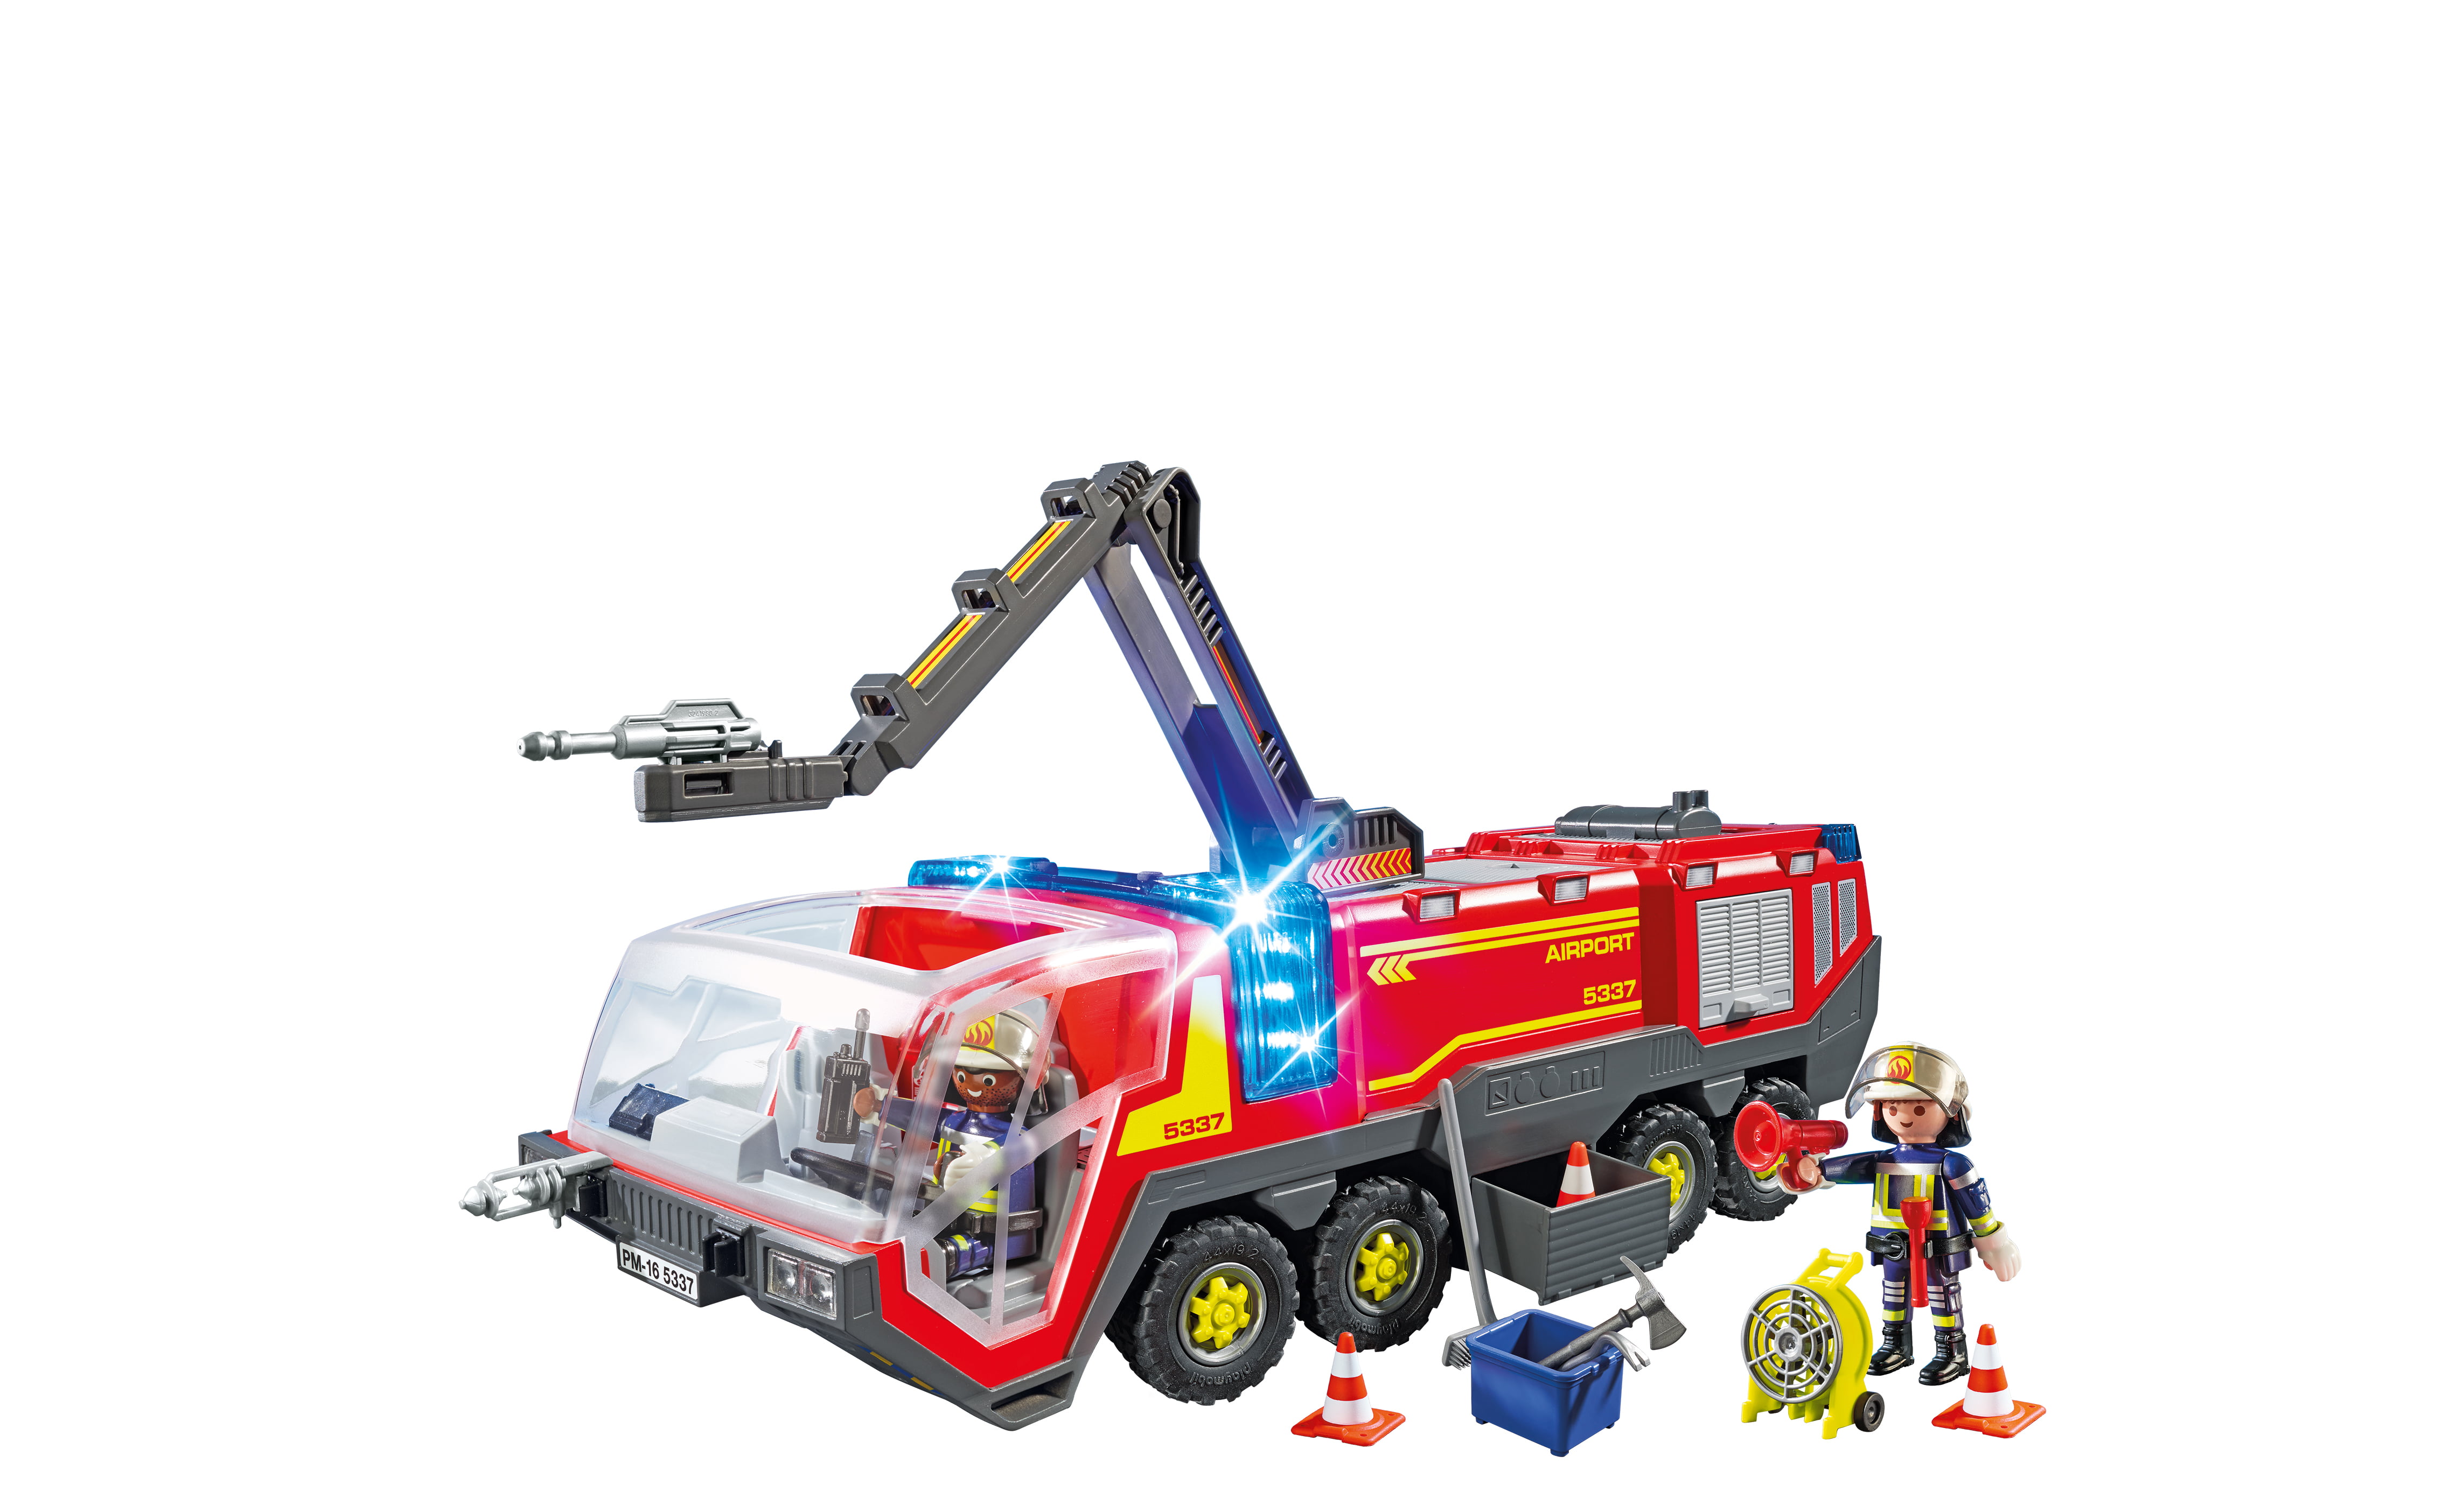 PLAYMOBIL 5337 Airport Fire Engine With Lights and Sound 2x Figures for sale online 